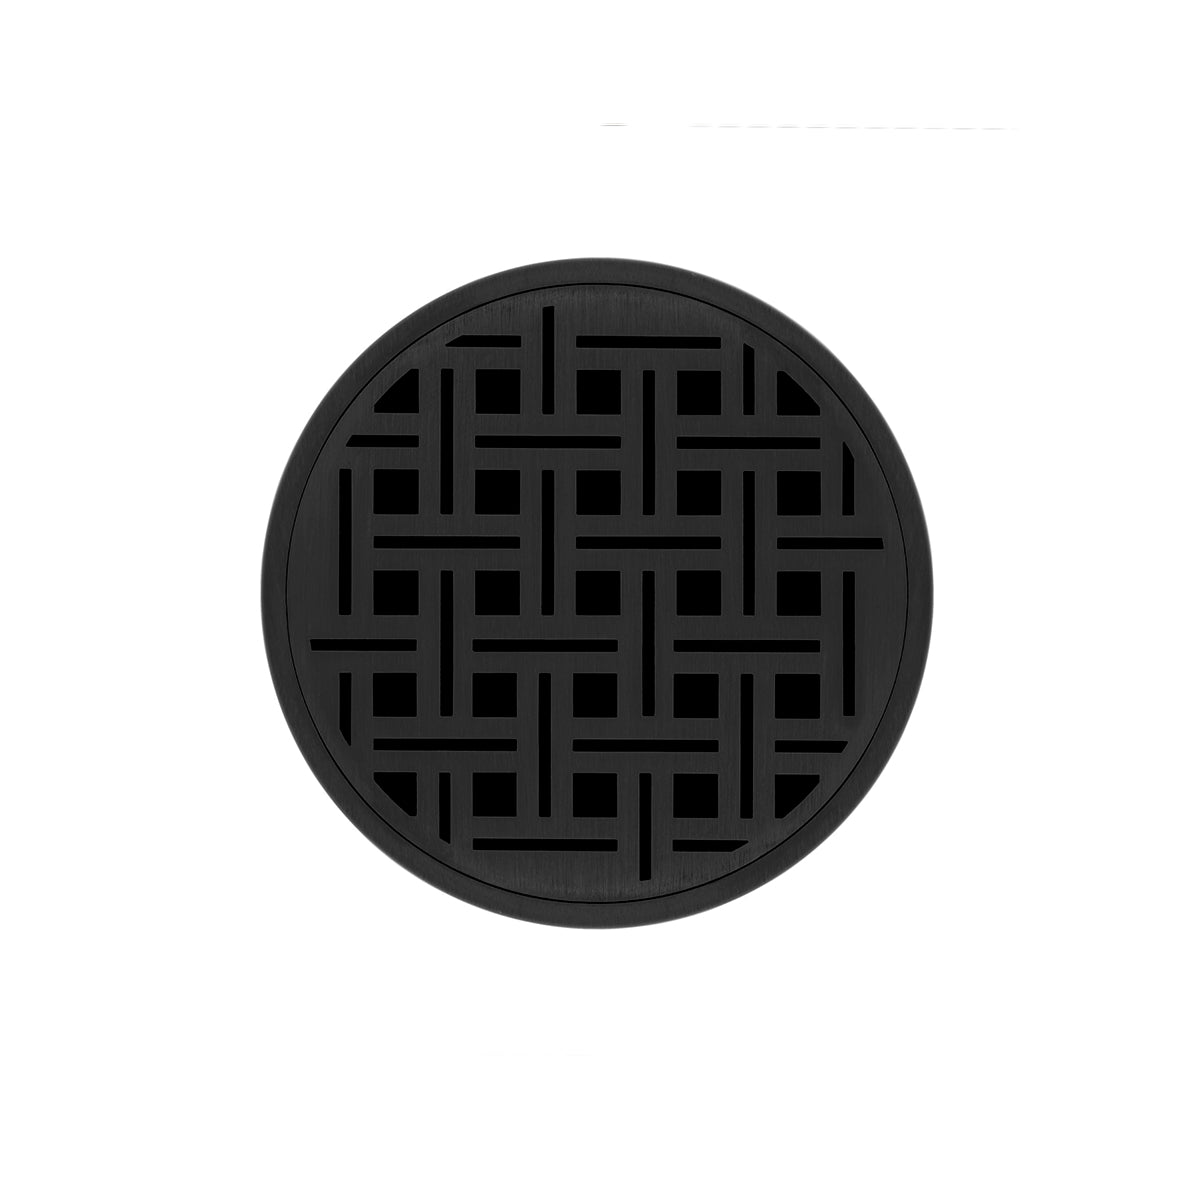 Infinity Drain 5" Round RVD 5 Premium Center Drain Kit with Weave Pattern Decorative Plate with ABS Drain Body, 2" Outlet